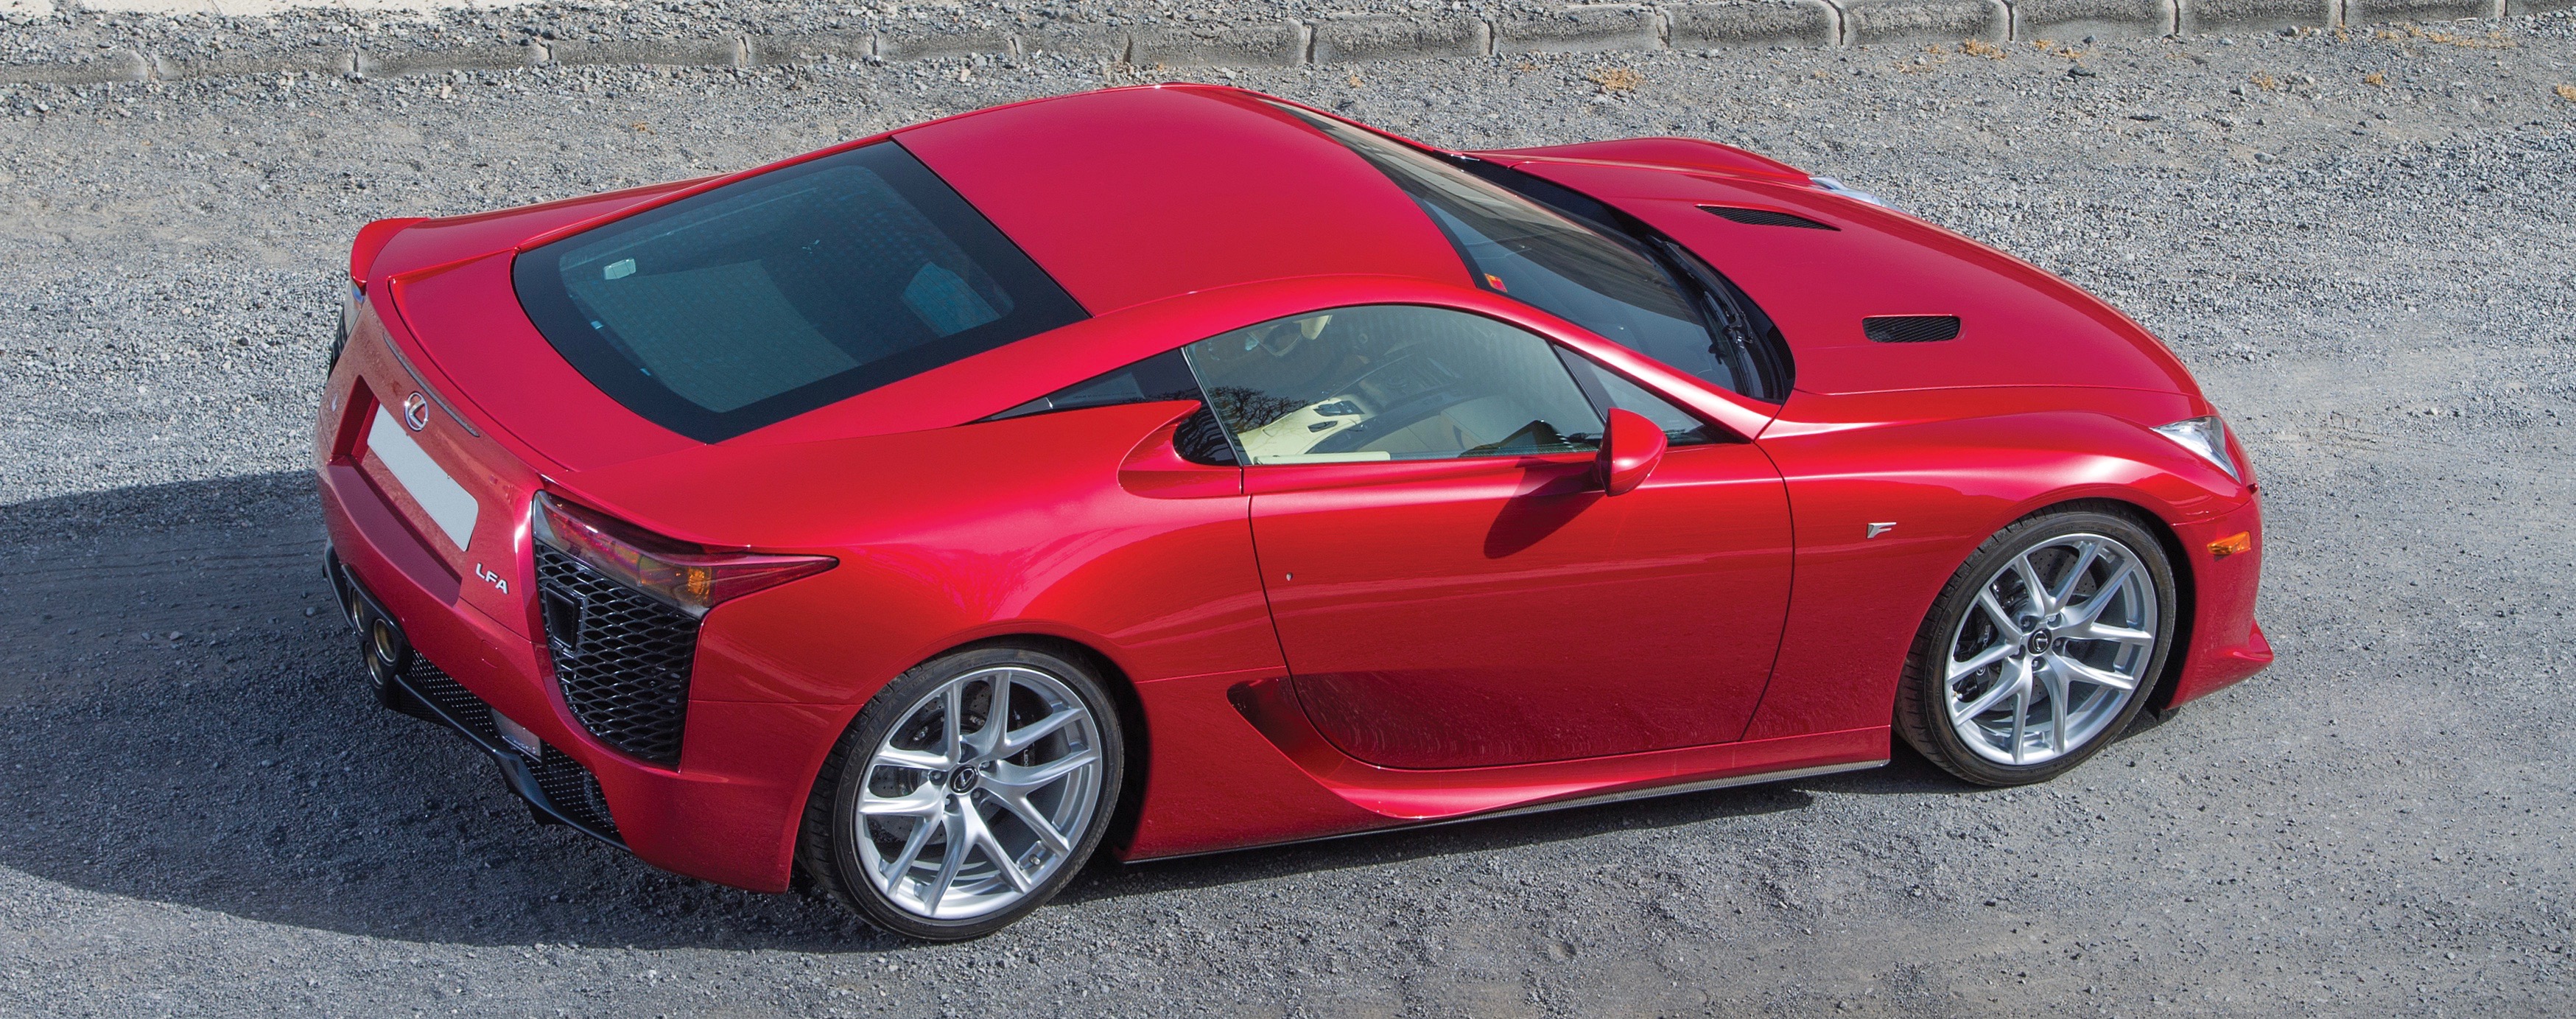 , Lexus LFA: Buy it now &#8212; while it&#8217;s still affordable, ClassicCars.com Journal